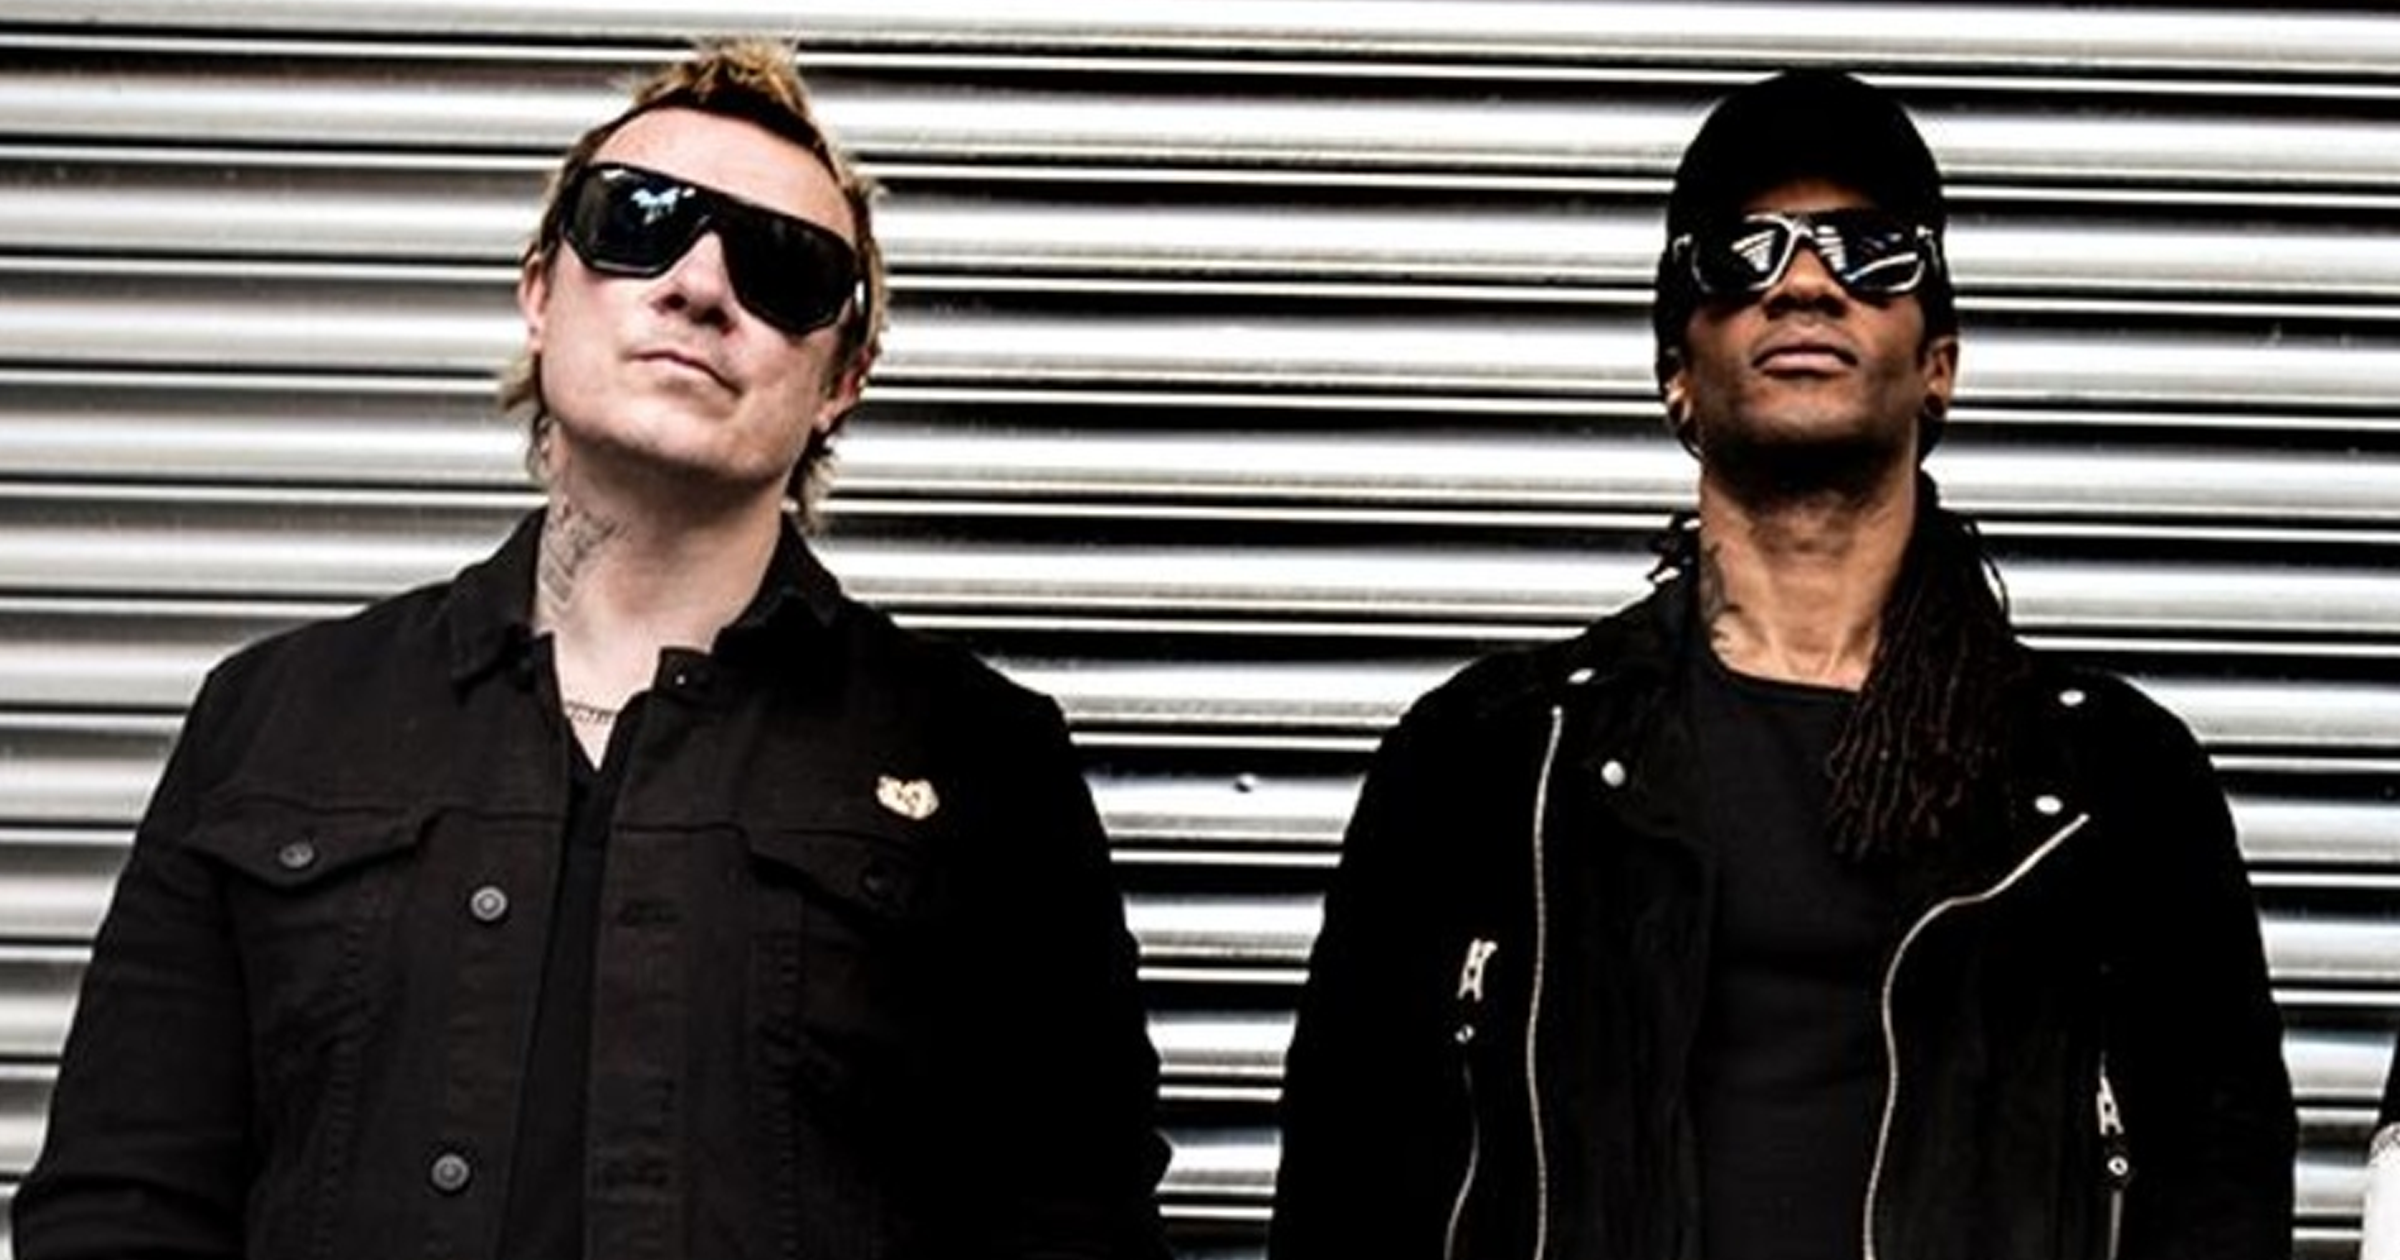 will the prodigy tour again